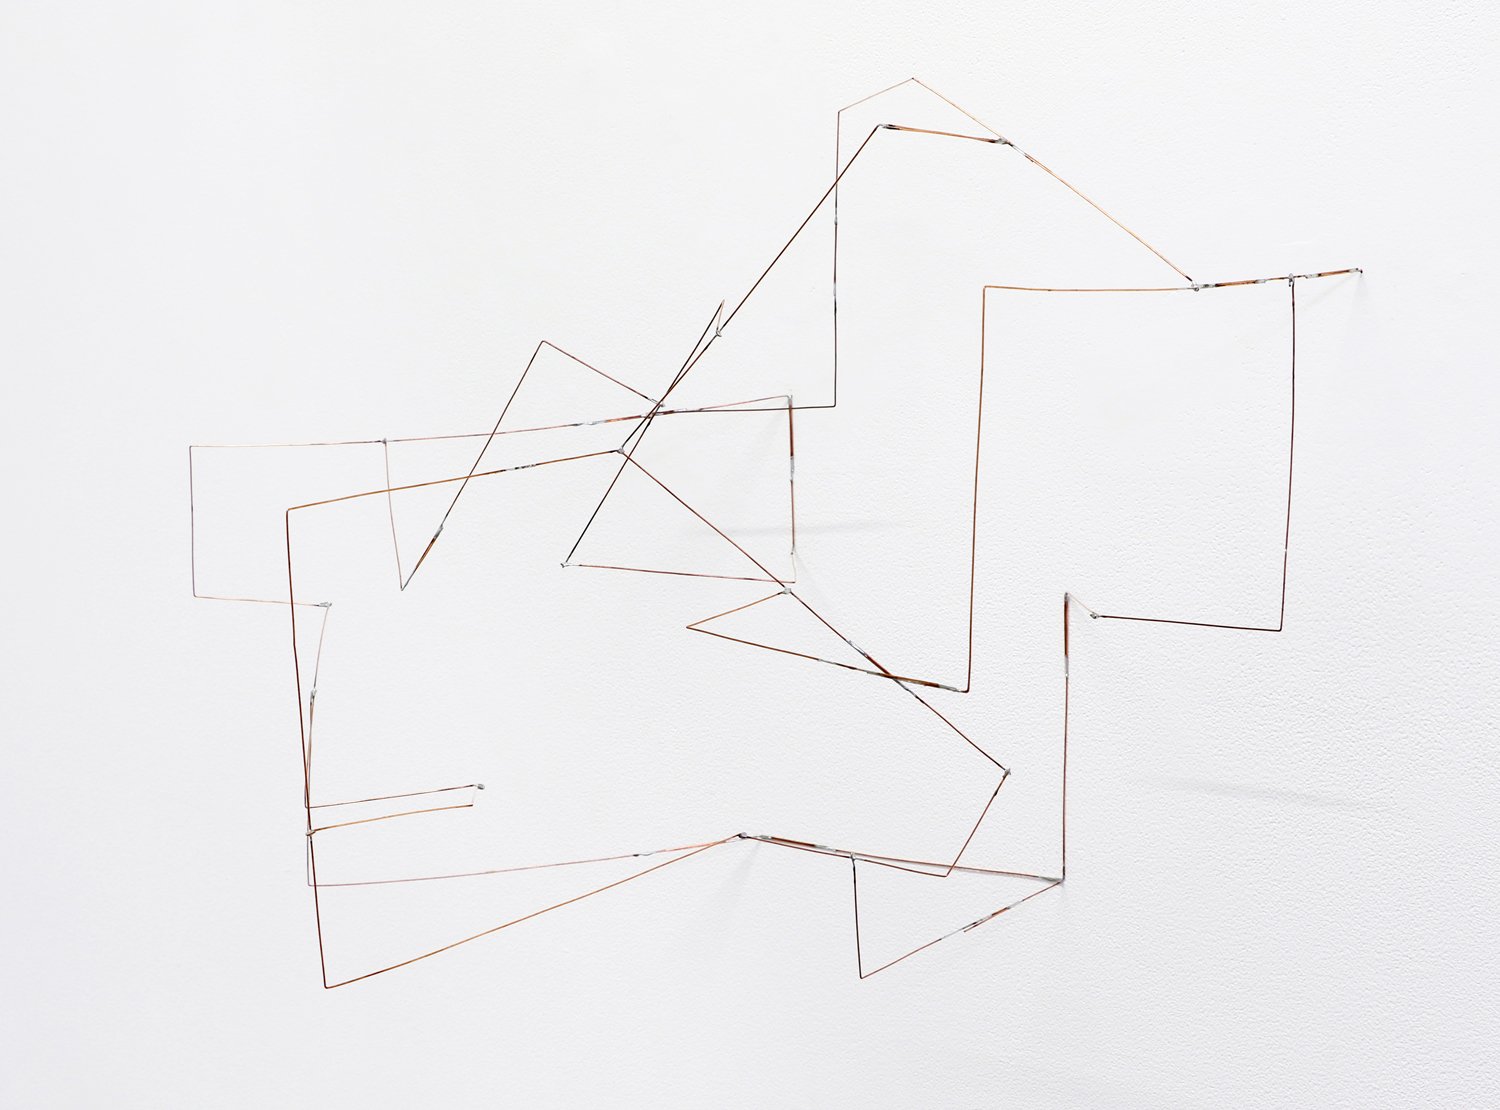   Melling , 2019, soldered copper-coated steel wire, 14 x 22 x 14 in 